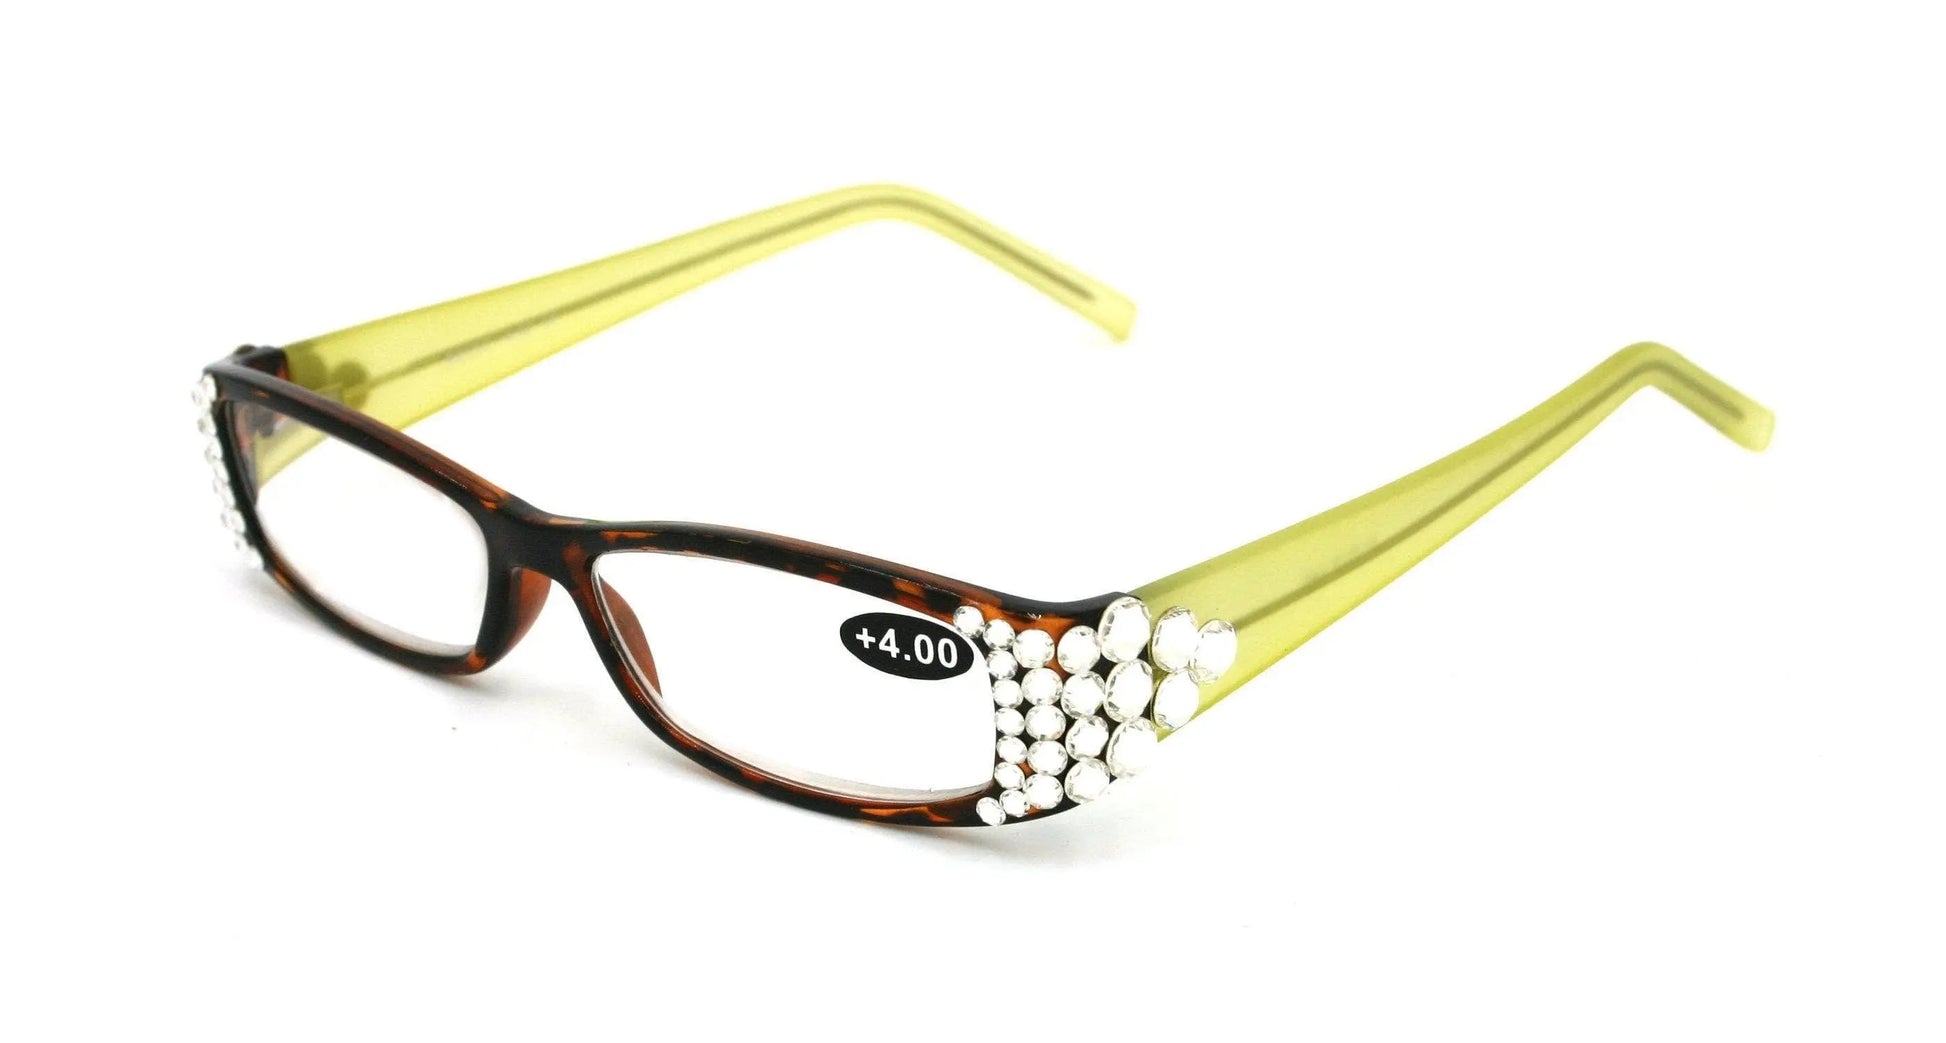 All Favorite, (Bling) Reading Glasses Women Adorned W (Clear)   (Tortoise Brown, Green) Frame +4 +4.5 +5 +6 NY Fifth Avenue.